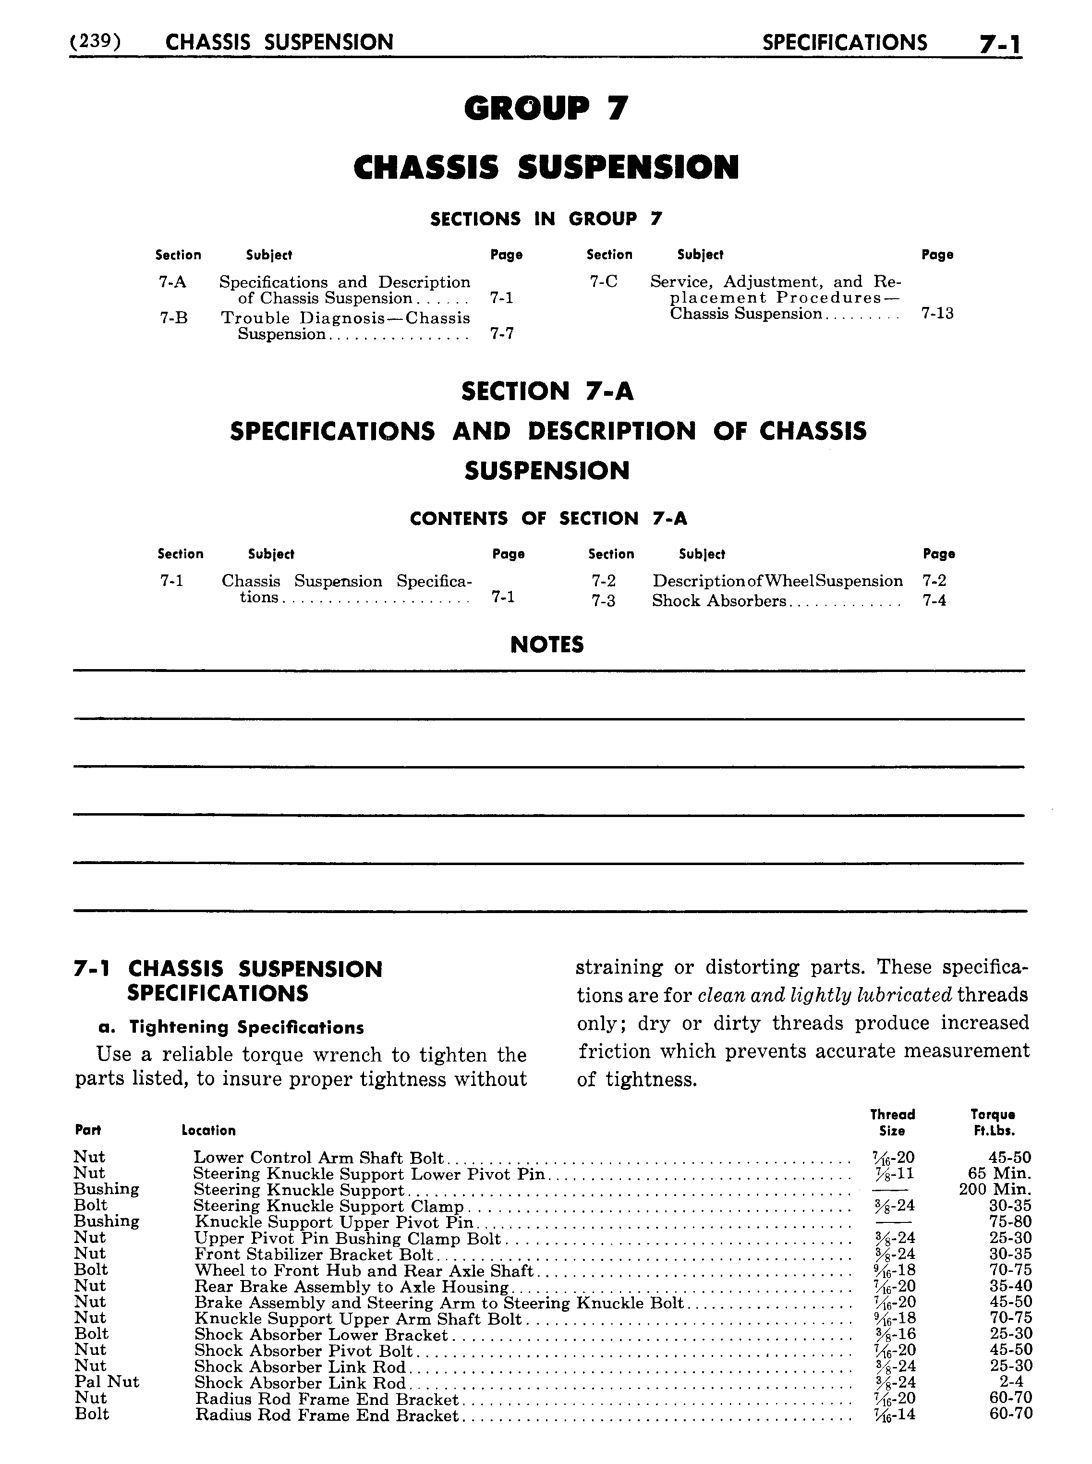 n_08 1956 Buick Shop Manual - Chassis Suspension-001-001.jpg